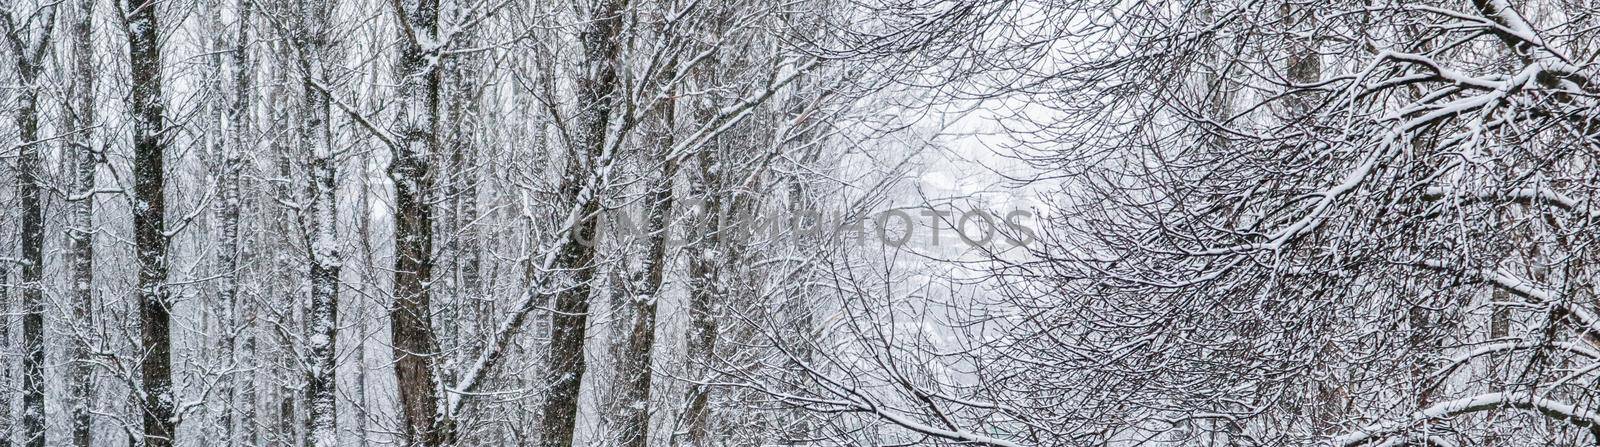 Snowing landscape, winter holiday concept - Fairytale fluffy snow-covered trees branches, nature scenery with white snow and cold weather. Snowfall in winter park. Soft focus